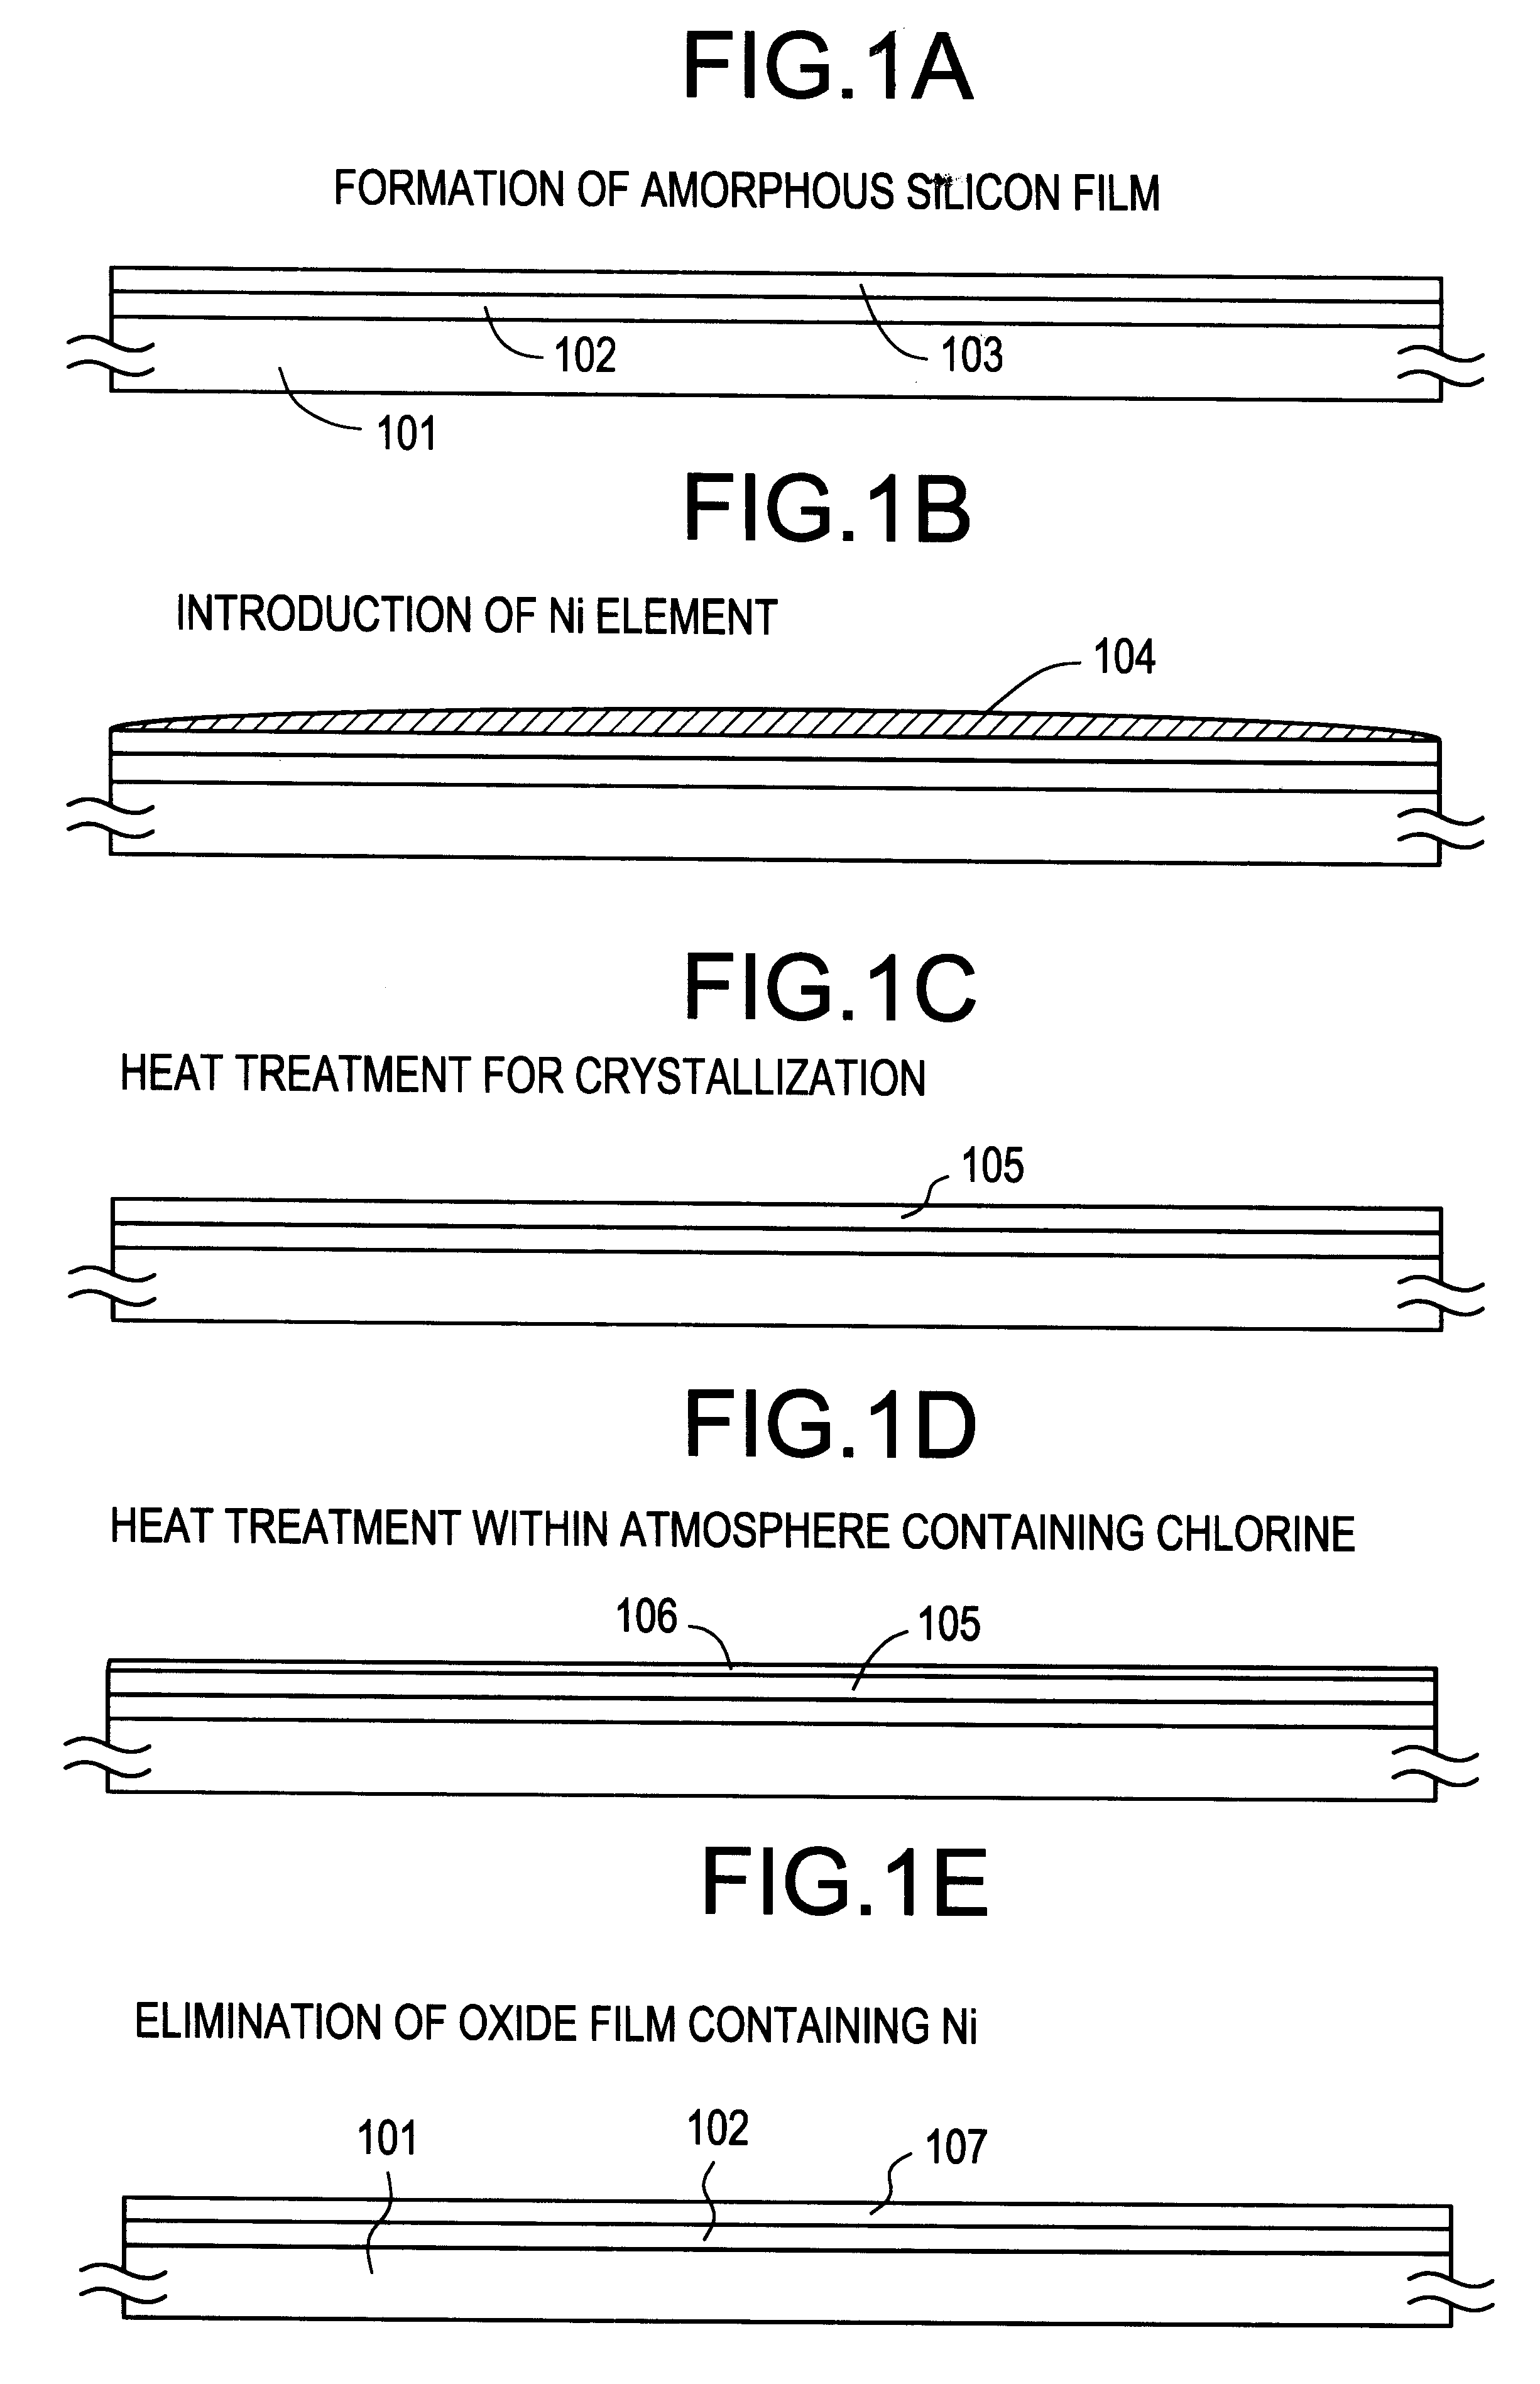 Display switch with double layered gate insulation and resinous interlayer dielectric